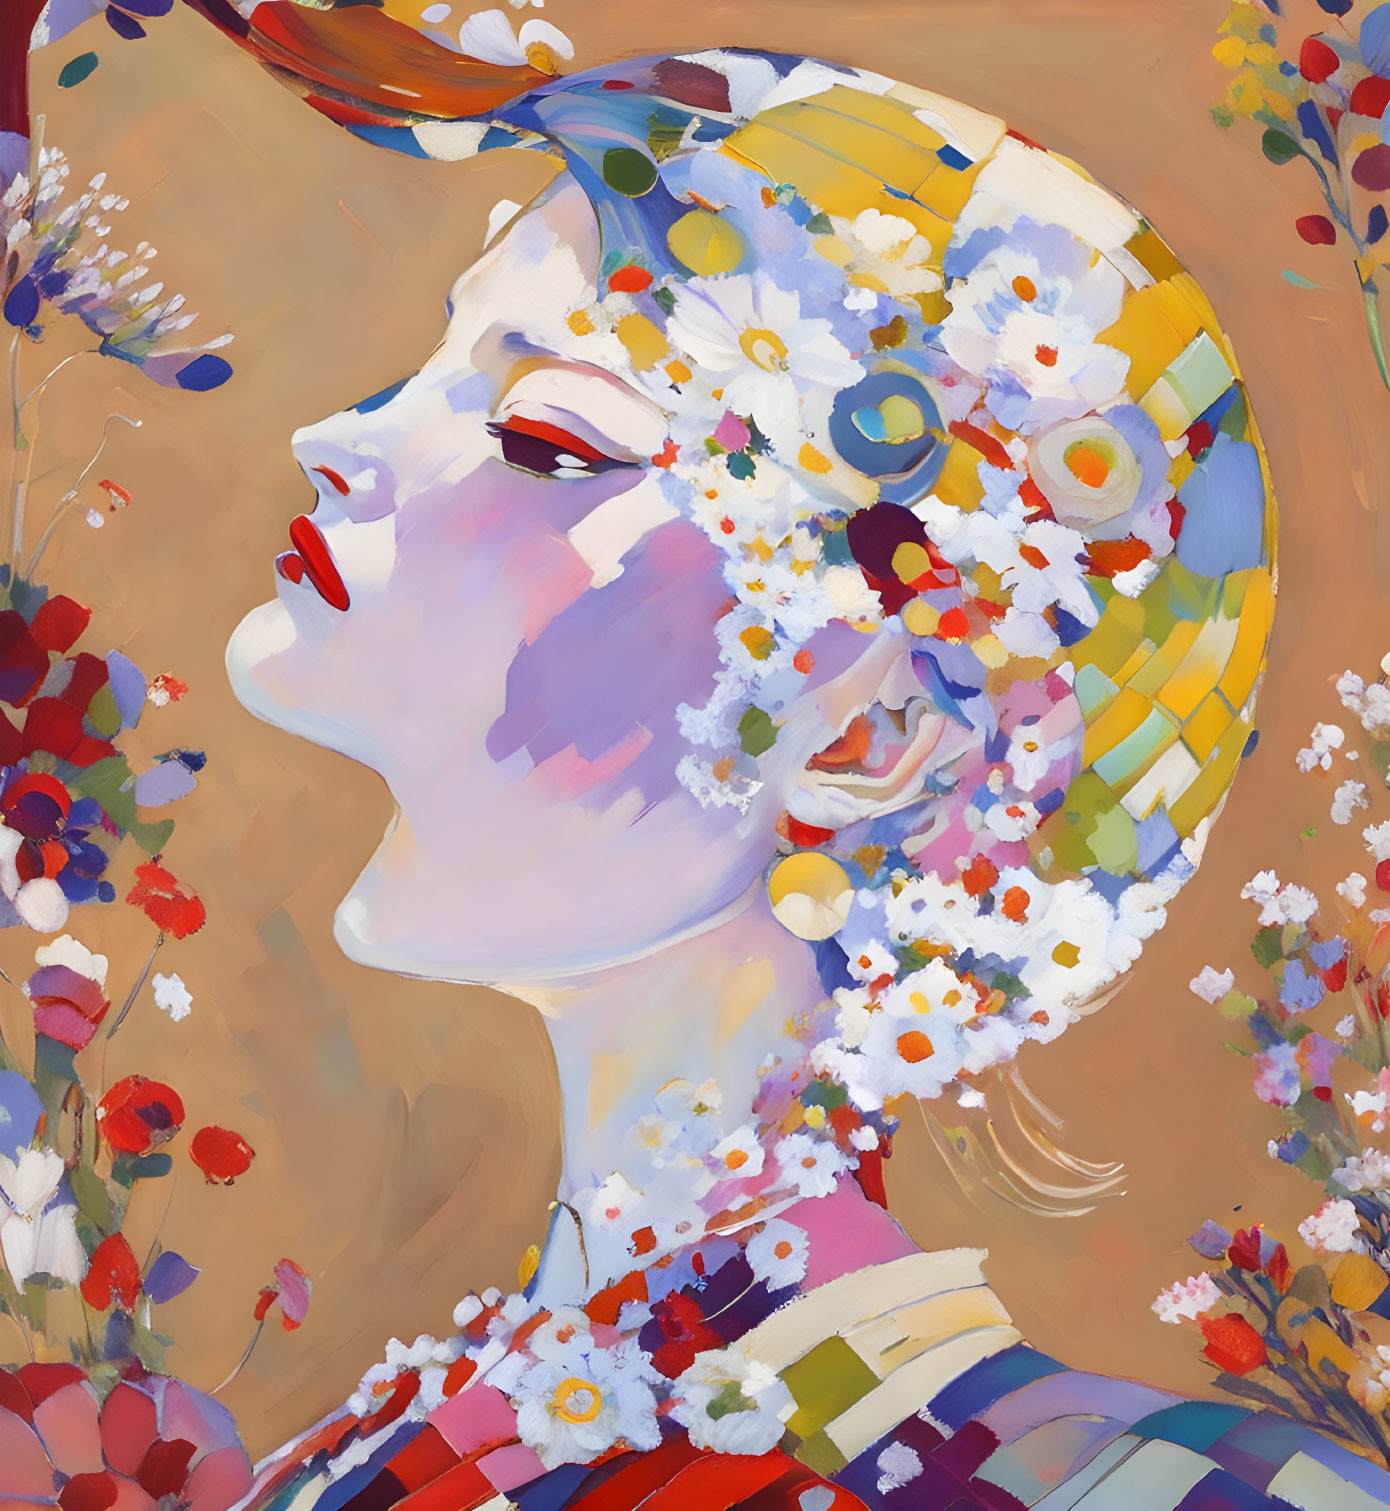 Stylized woman with floral pattern hair and hat on warm background